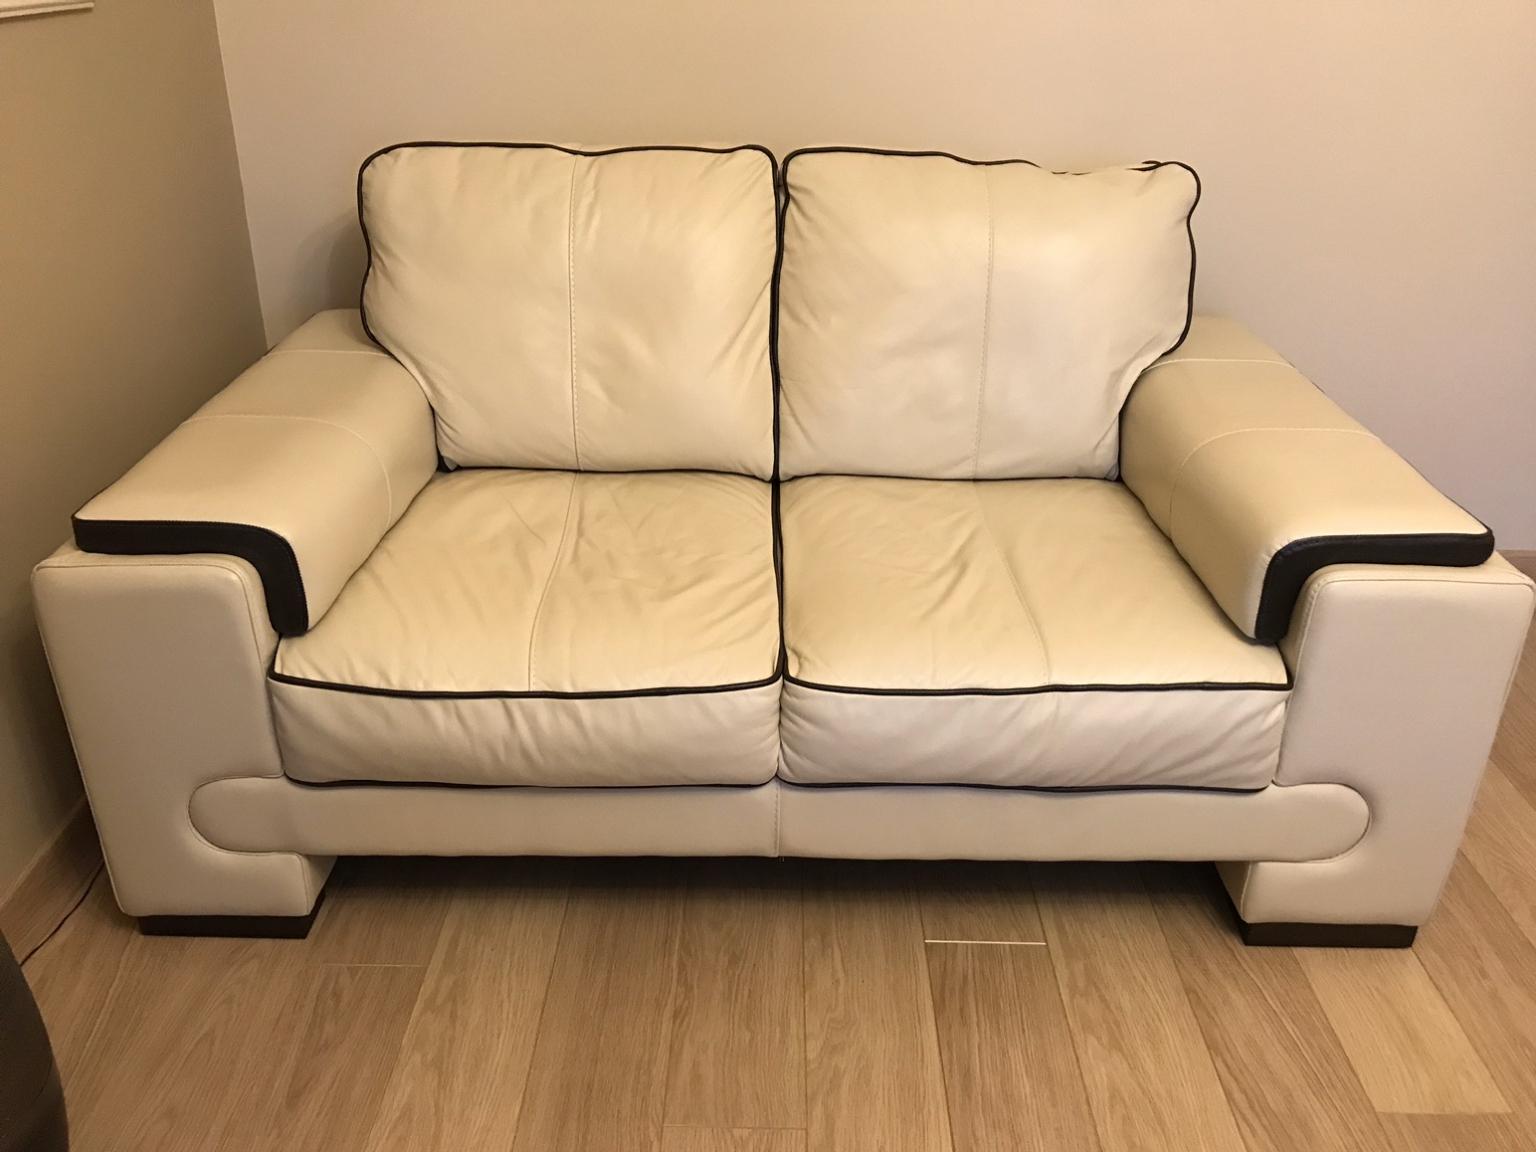 dfs leather sofa creases